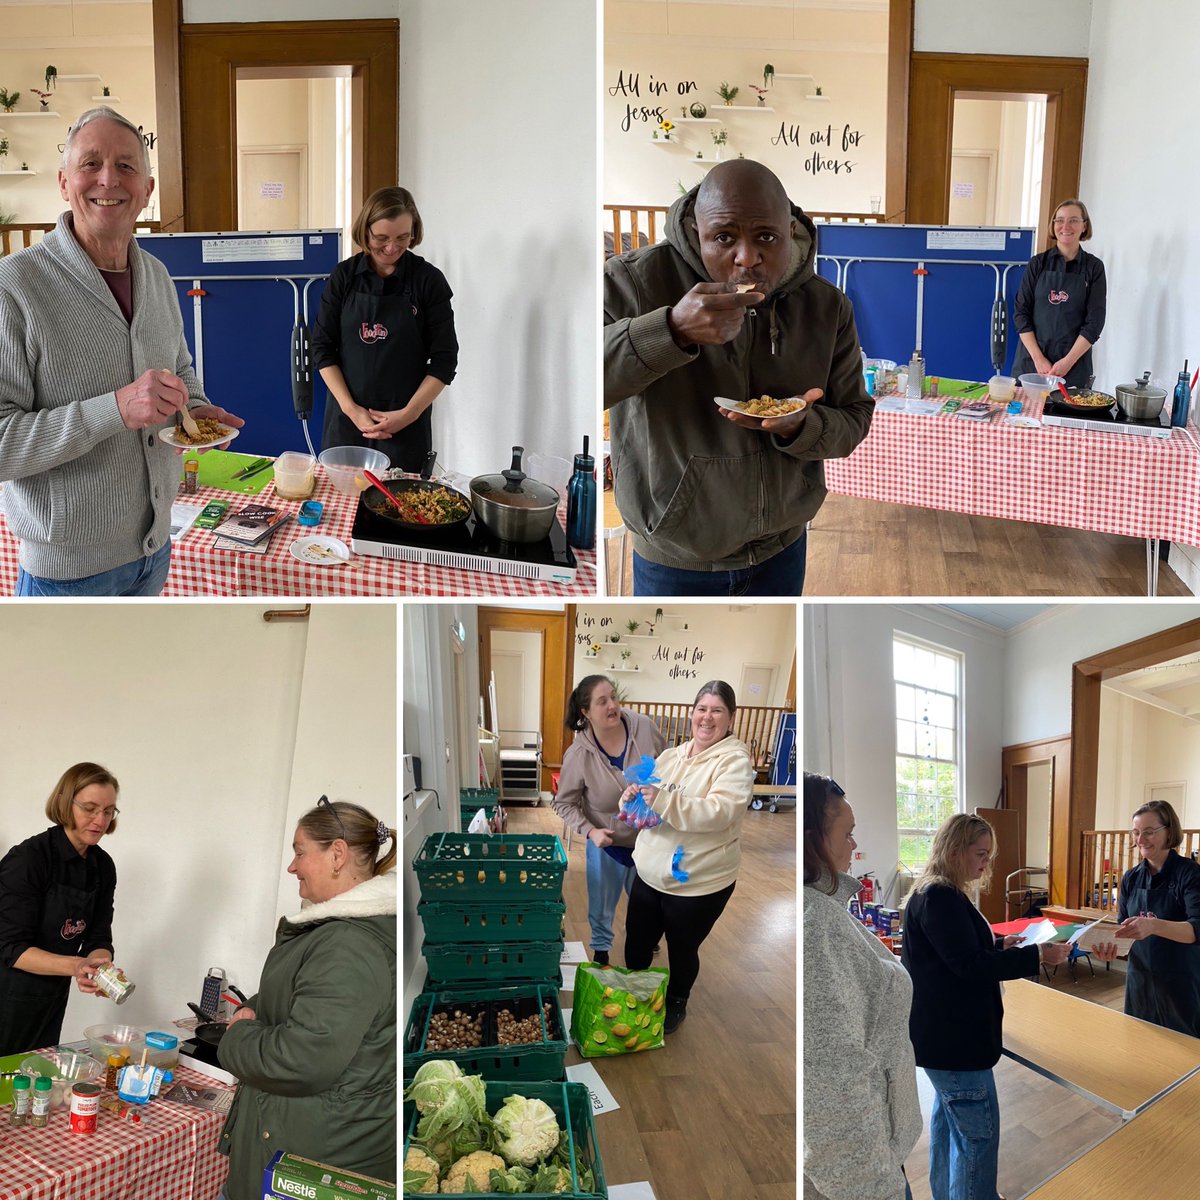 Pop up cookery course at our Mayflower Co-op last Friday, helping with new inspiration and recipes to go with our shopping.